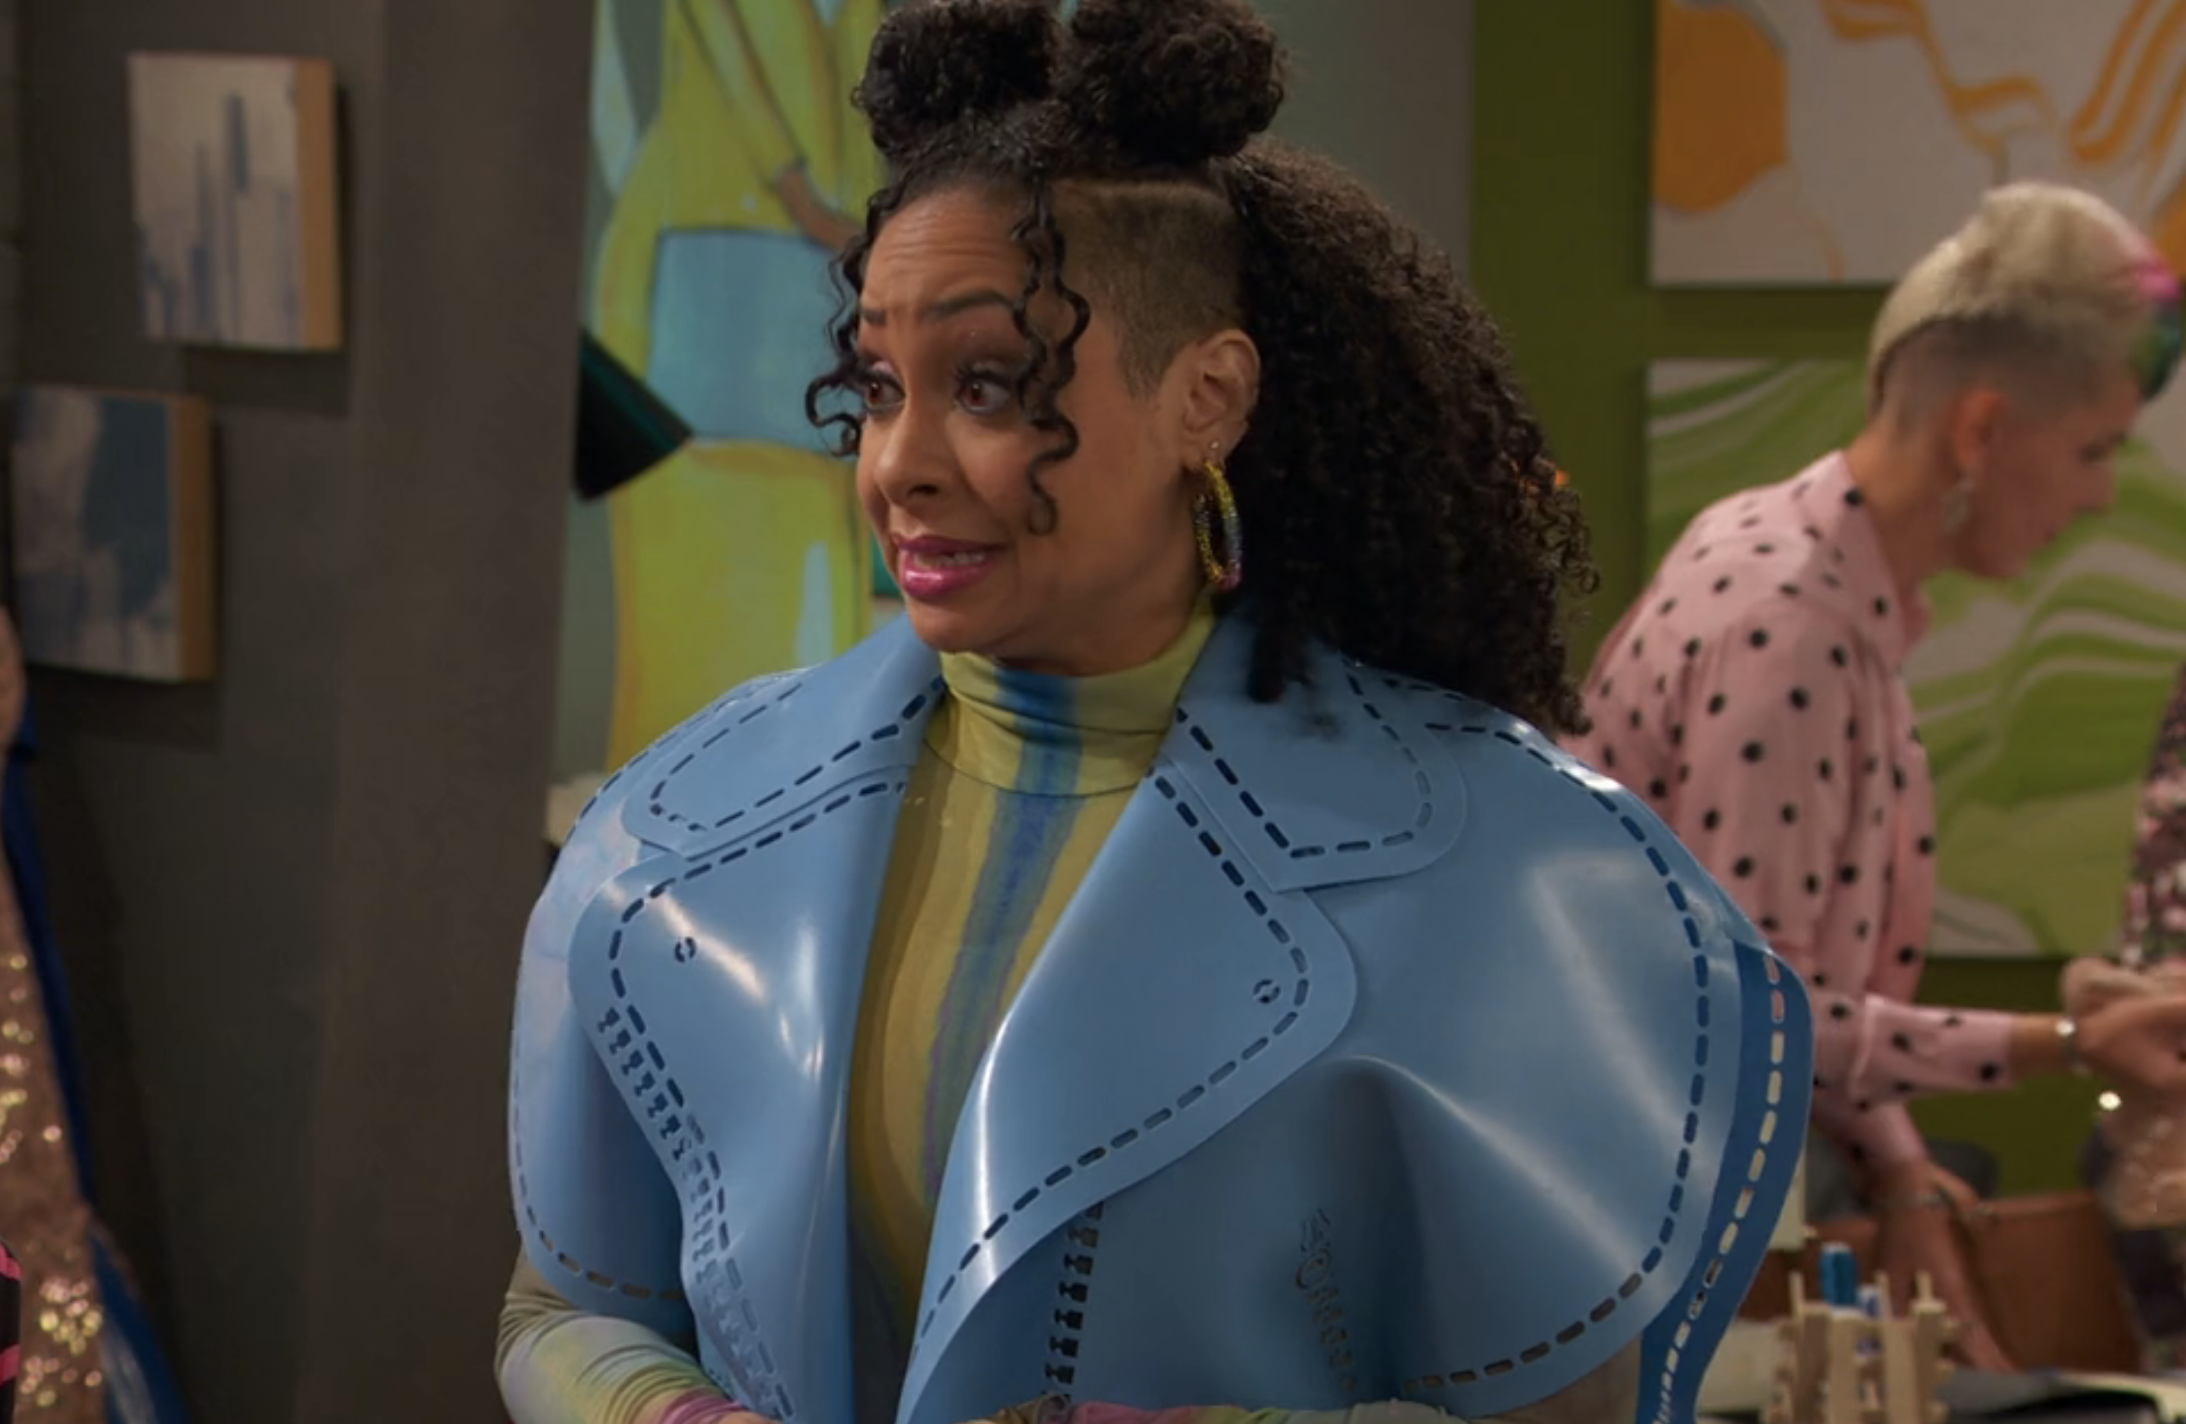 Raven as Raven Baxter in the new reboot Raven&#x27;s Home